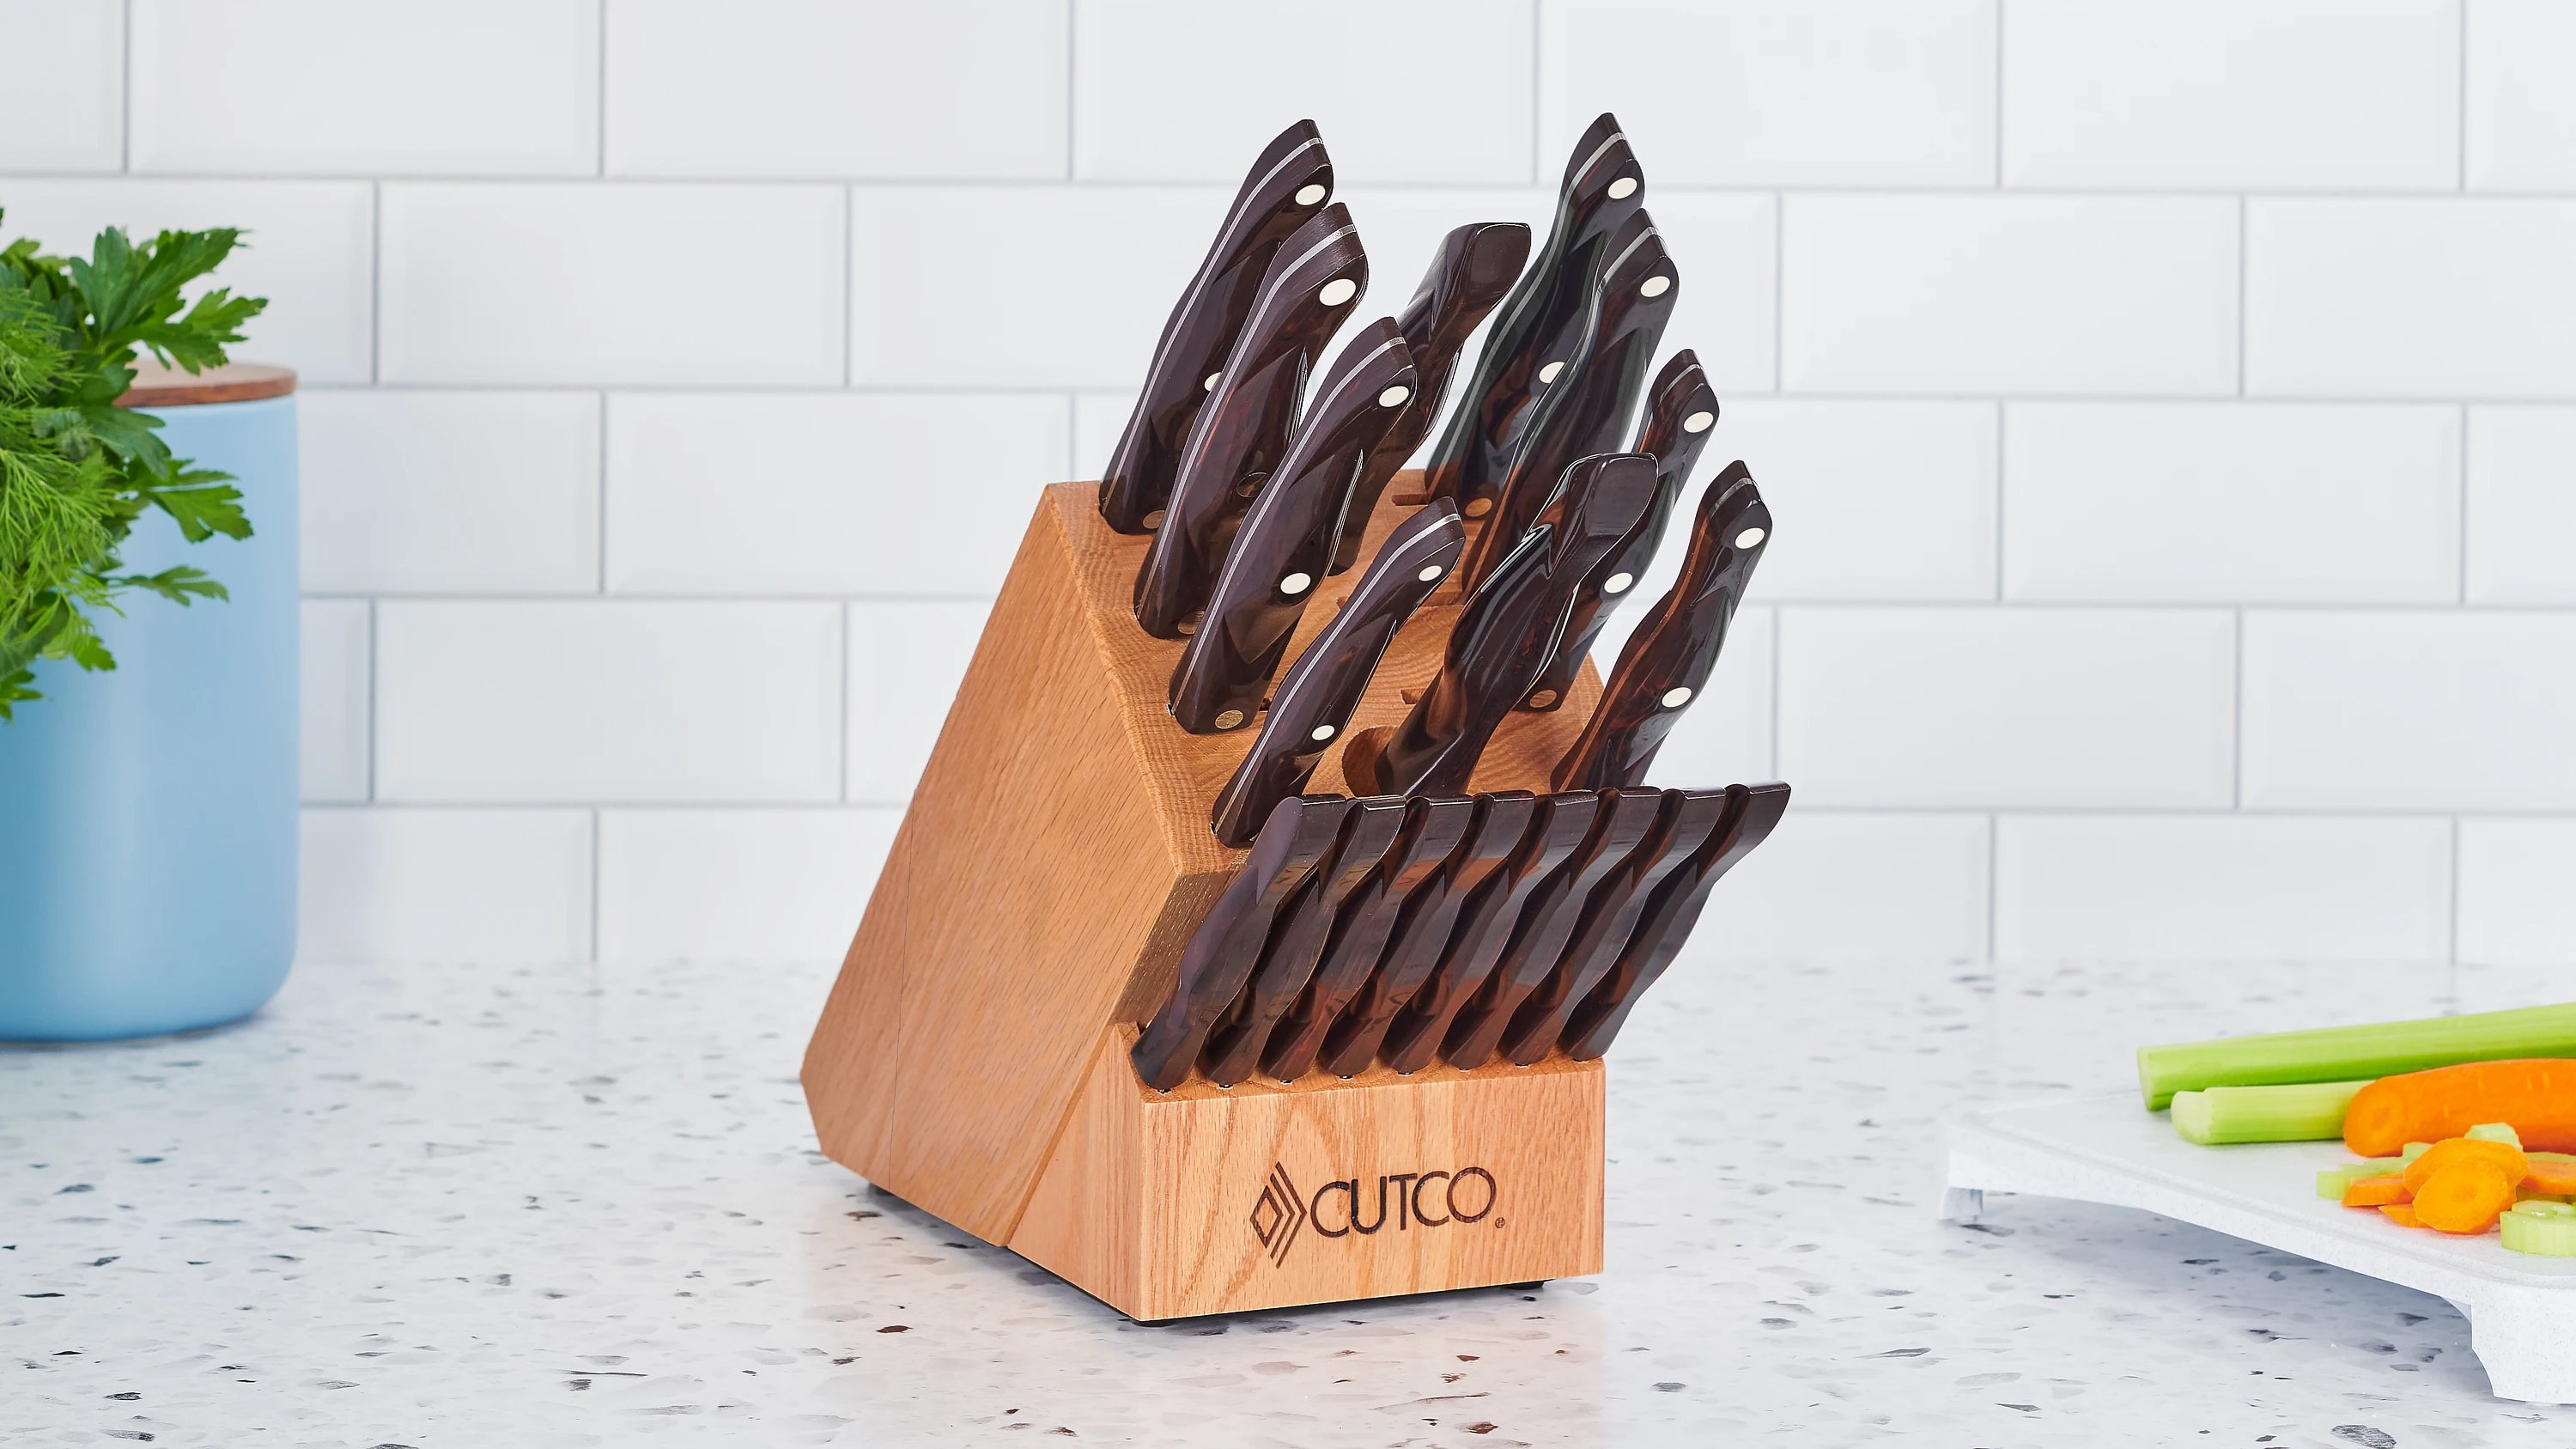 Cutco Cutlery - 25 years ago I bought some Cutco knives from